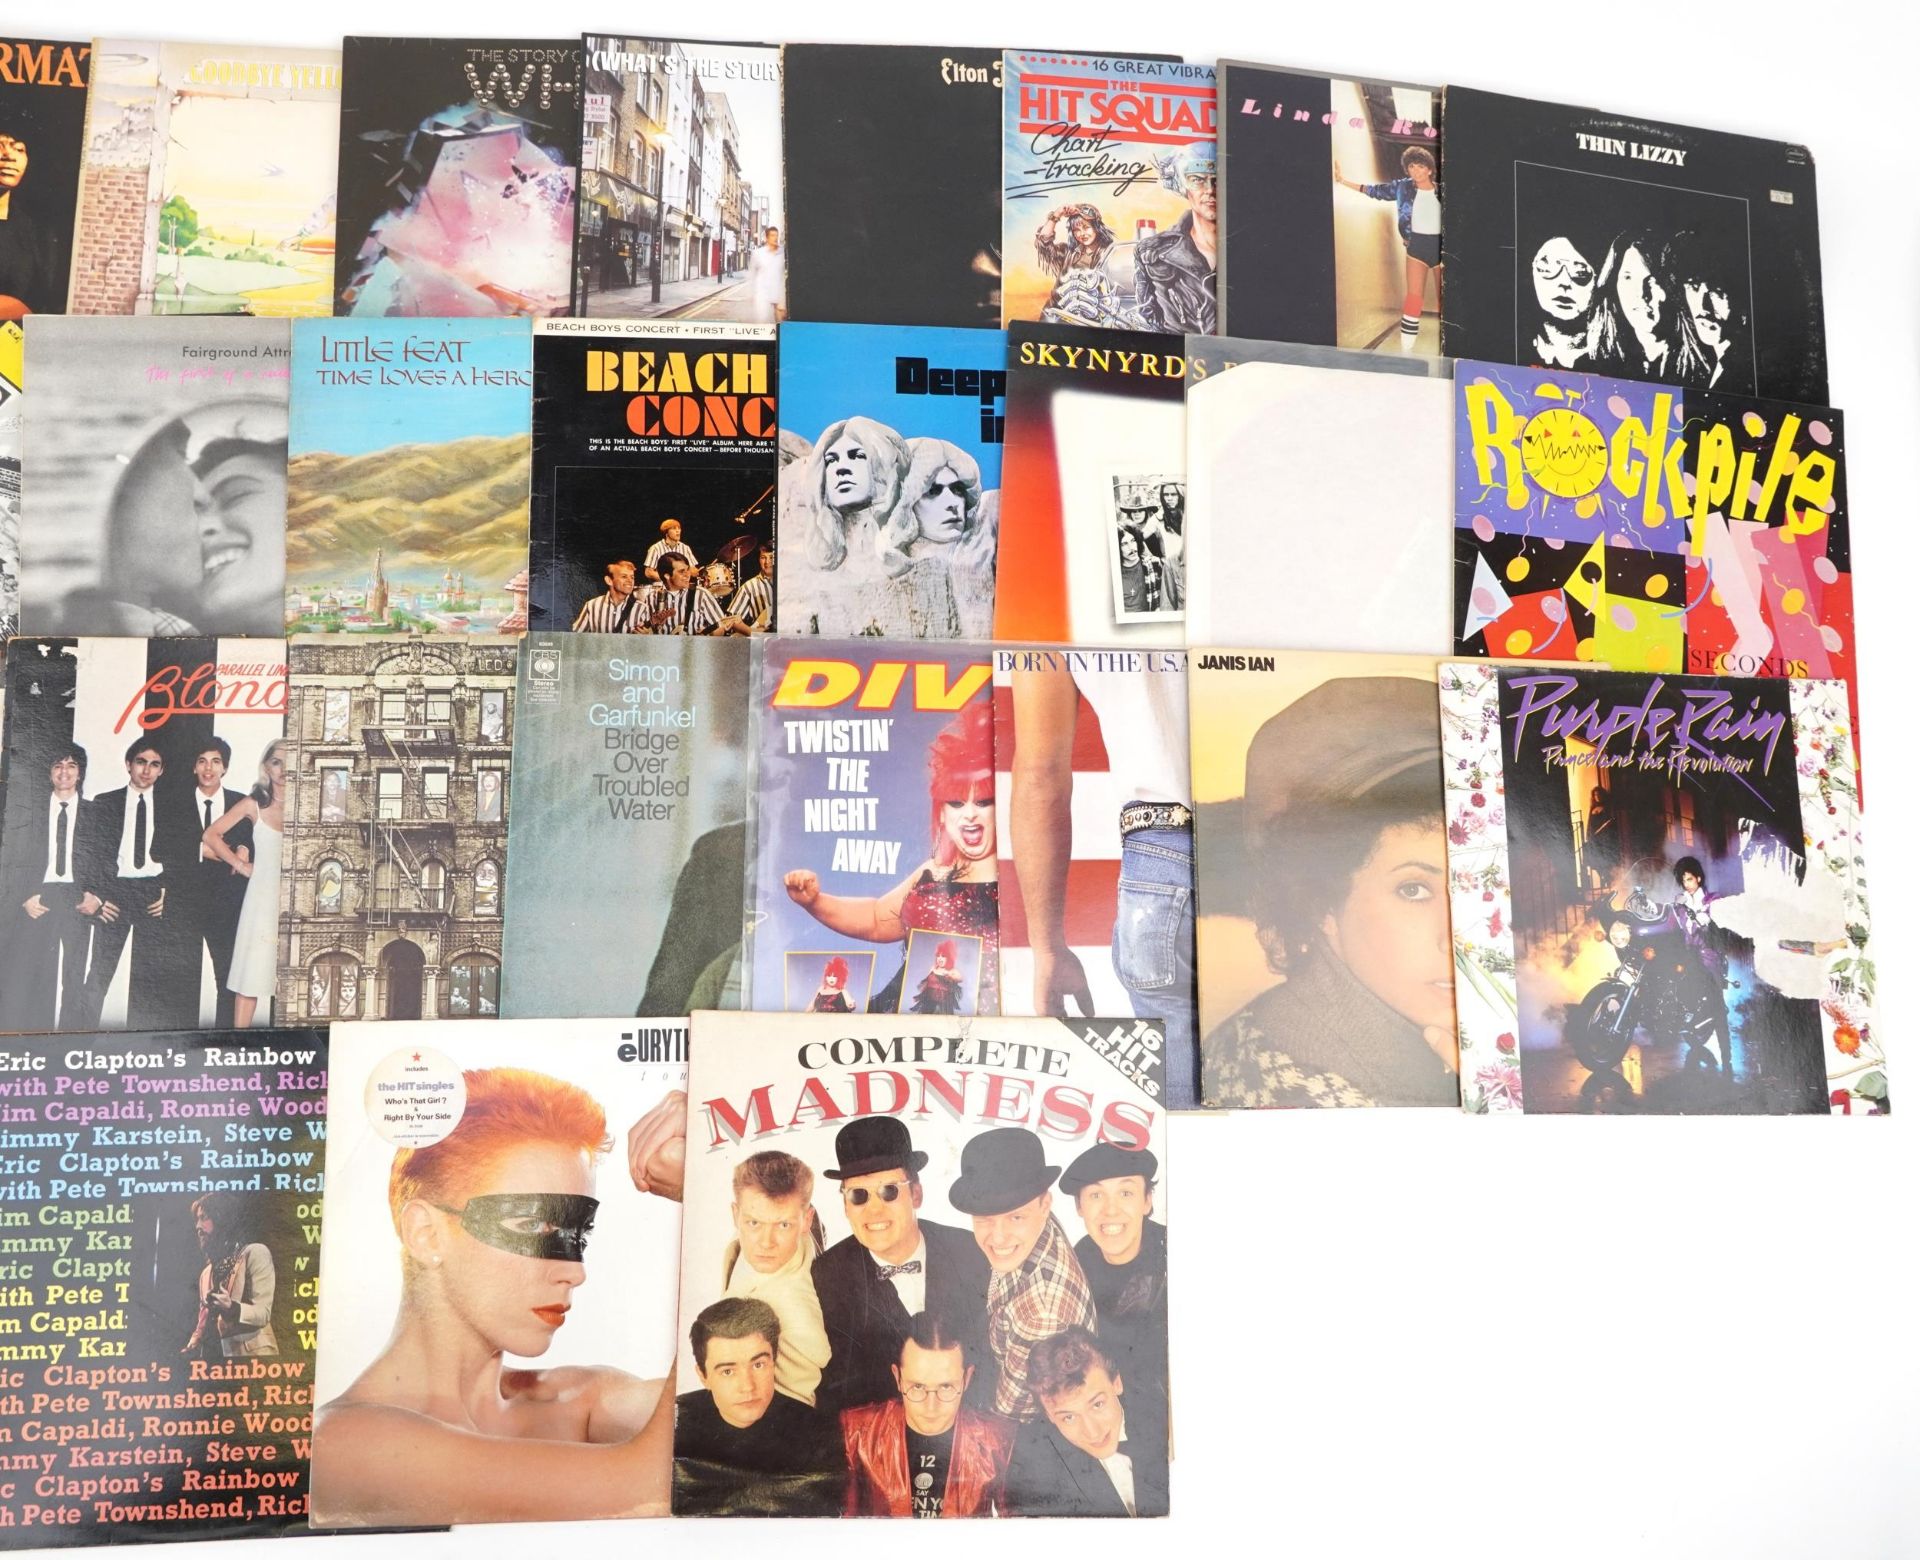 Vinyl LP records including The Communards signed by Richard Coles, Elton John, The Who, Oasis, - Image 3 of 3